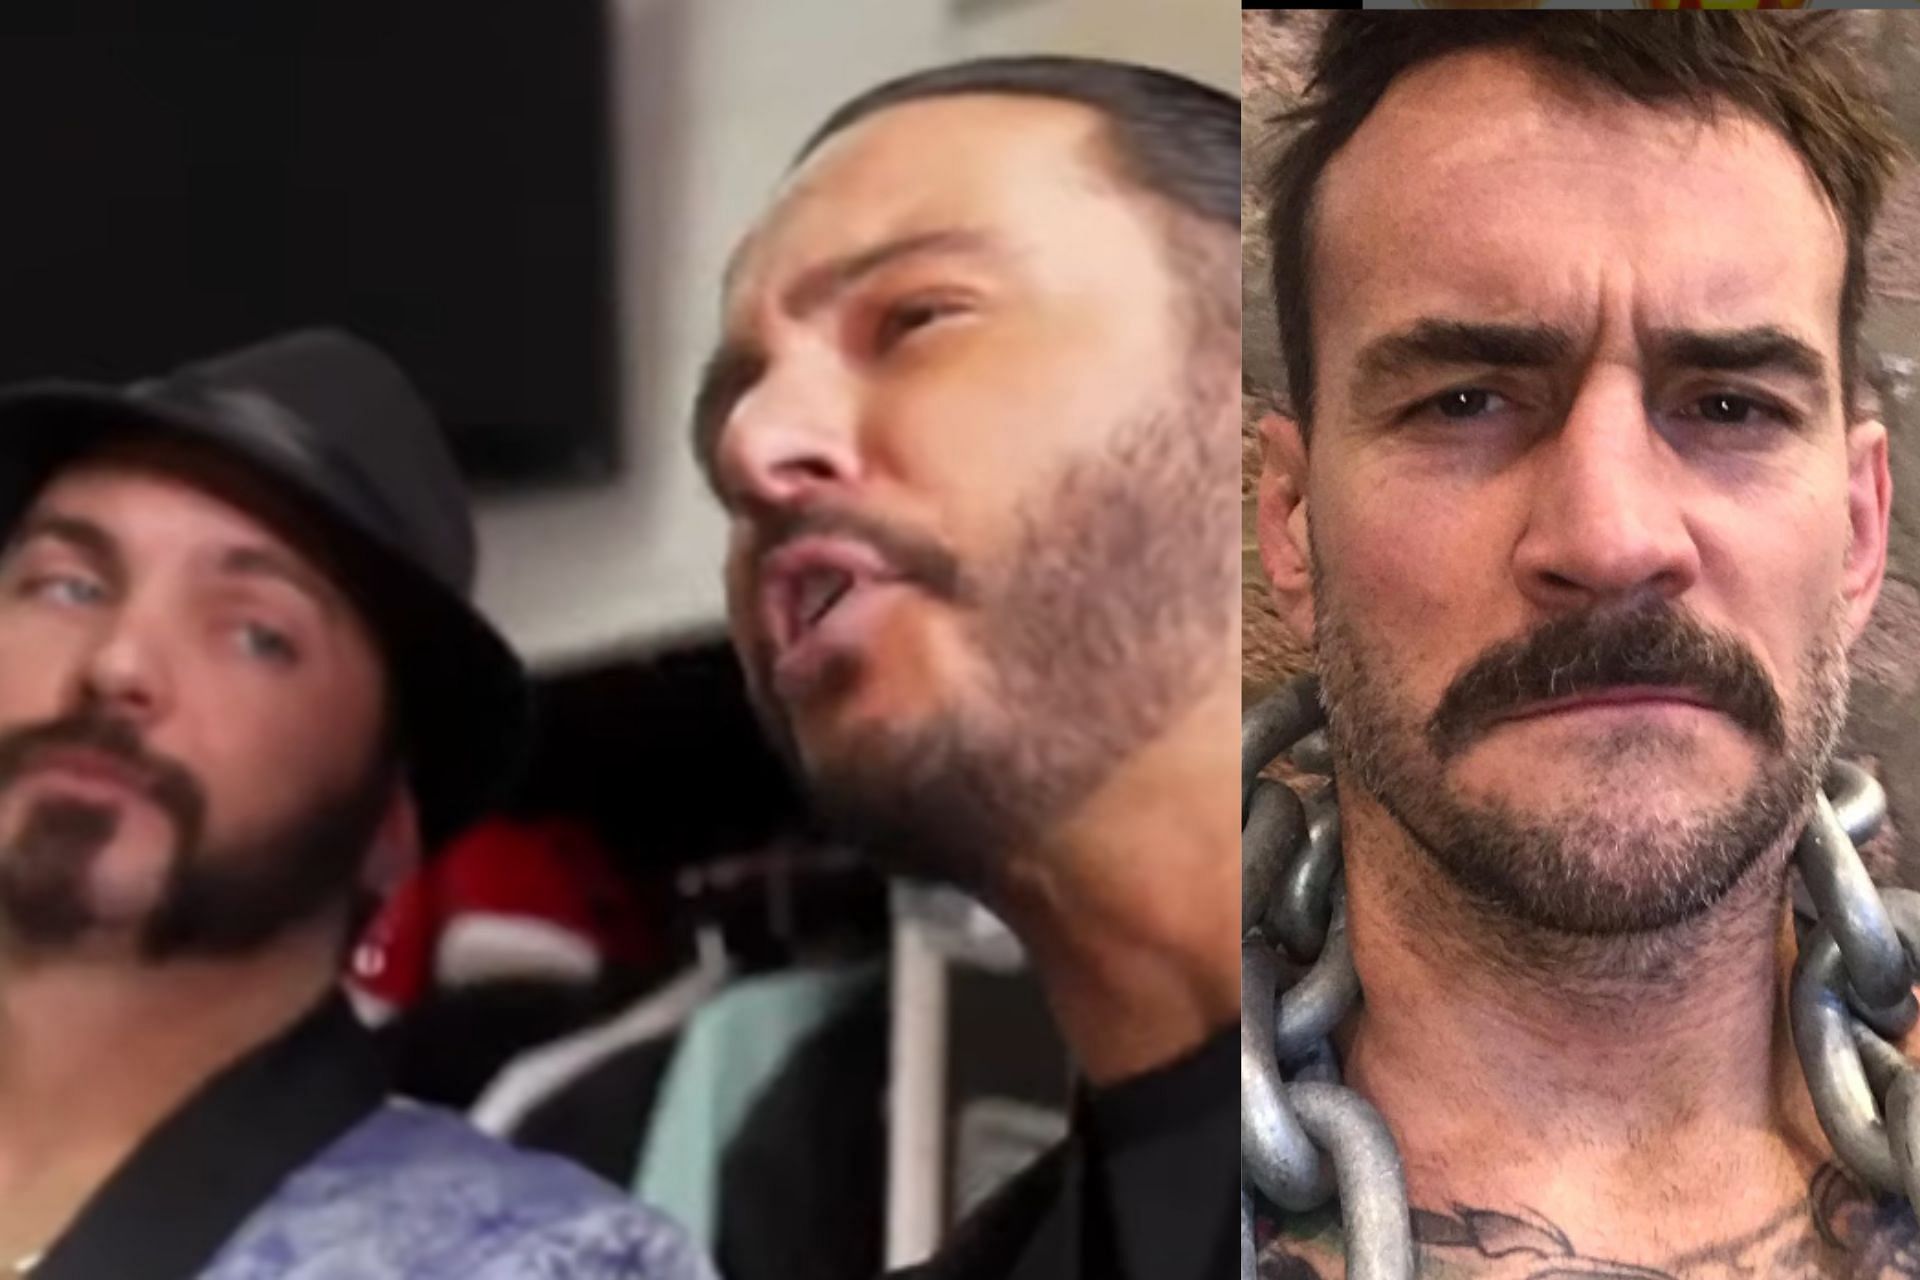 More details are coming out about the CM Punk Jack Perry altercation and footage [Image Credits: CM Punk Instagram and AEW Youtube]